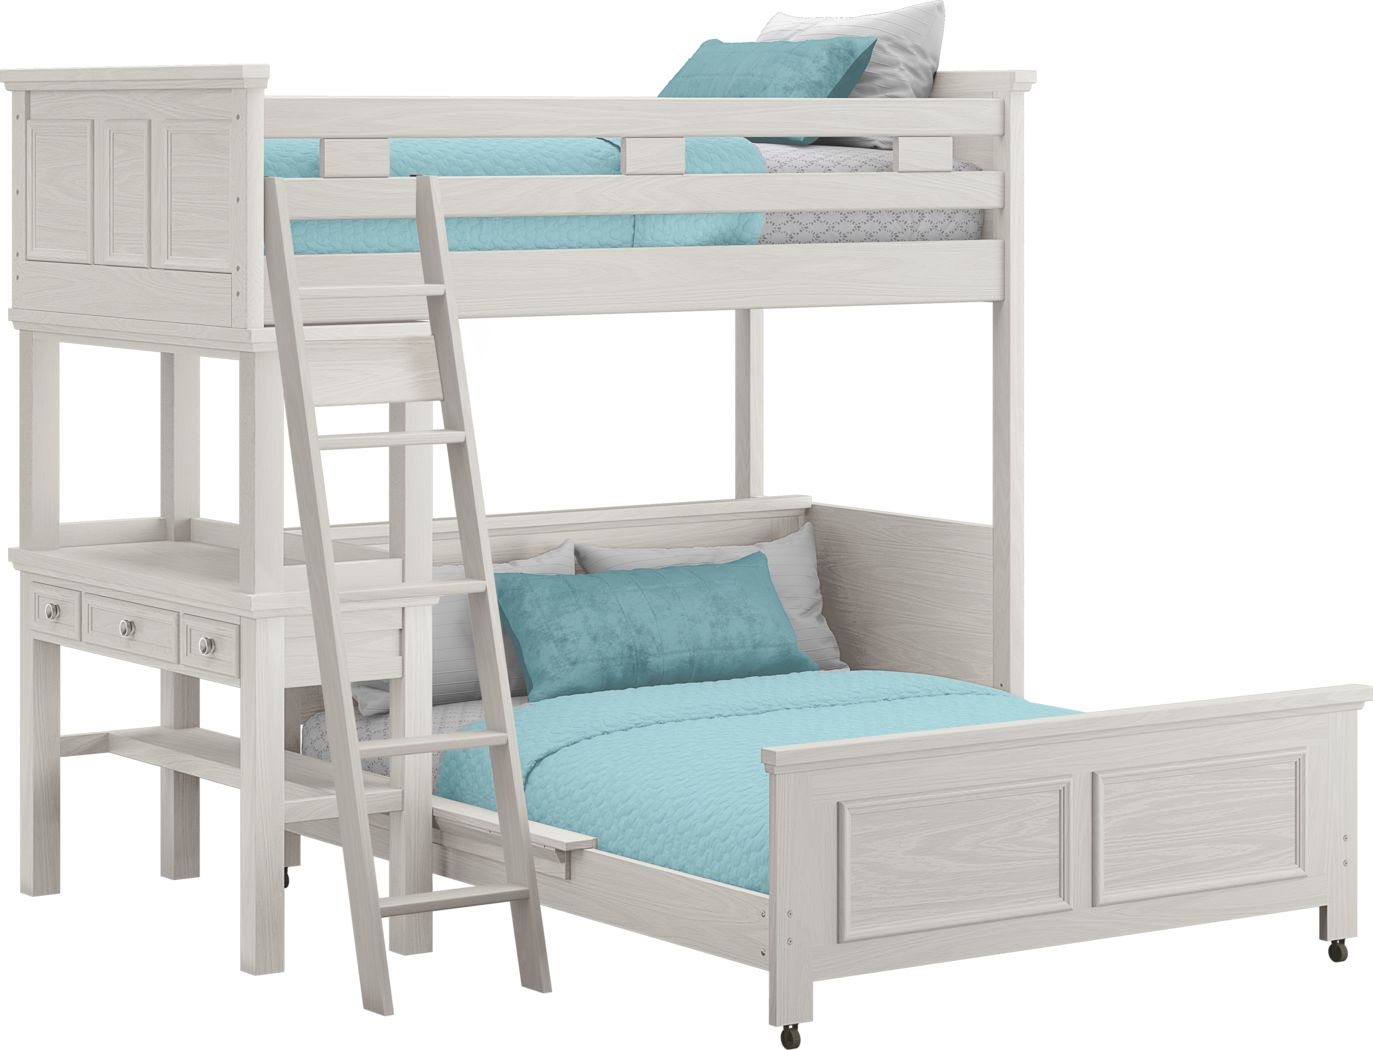 Loft Beds With Desks Underneath, Angel Line Creston Twin Over Twin Bunk Bed Instructions